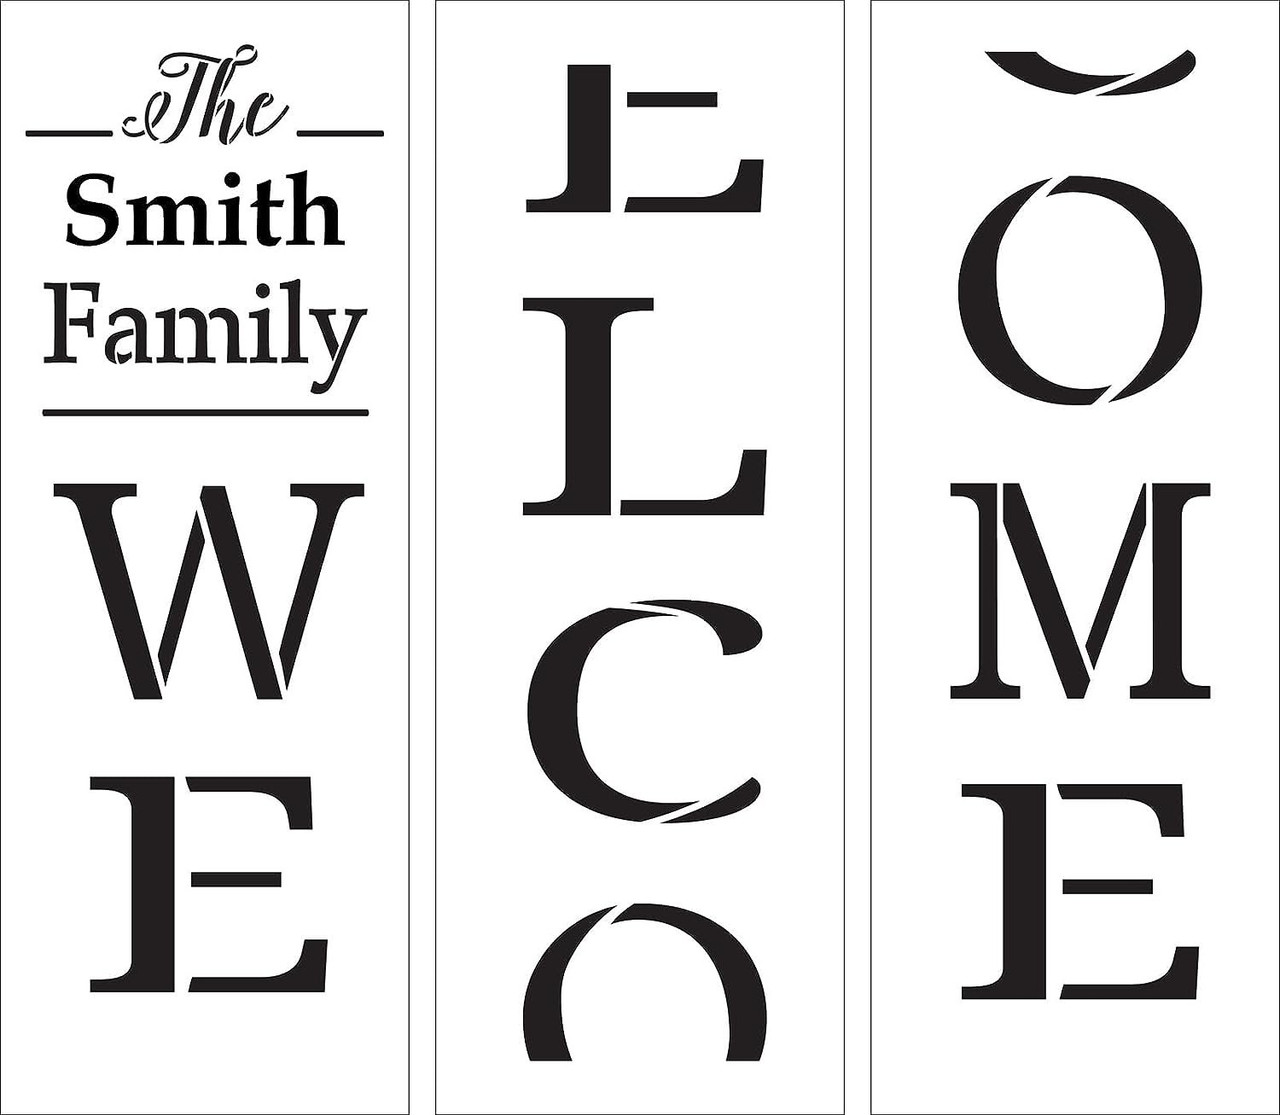 Personalized Family Welcome Tall Porch Sign Stencil by StudioR12-6ft Vertical Leaner Sign Template - USA Made - DIY Custom Outdoor Home Decor - PRST7076